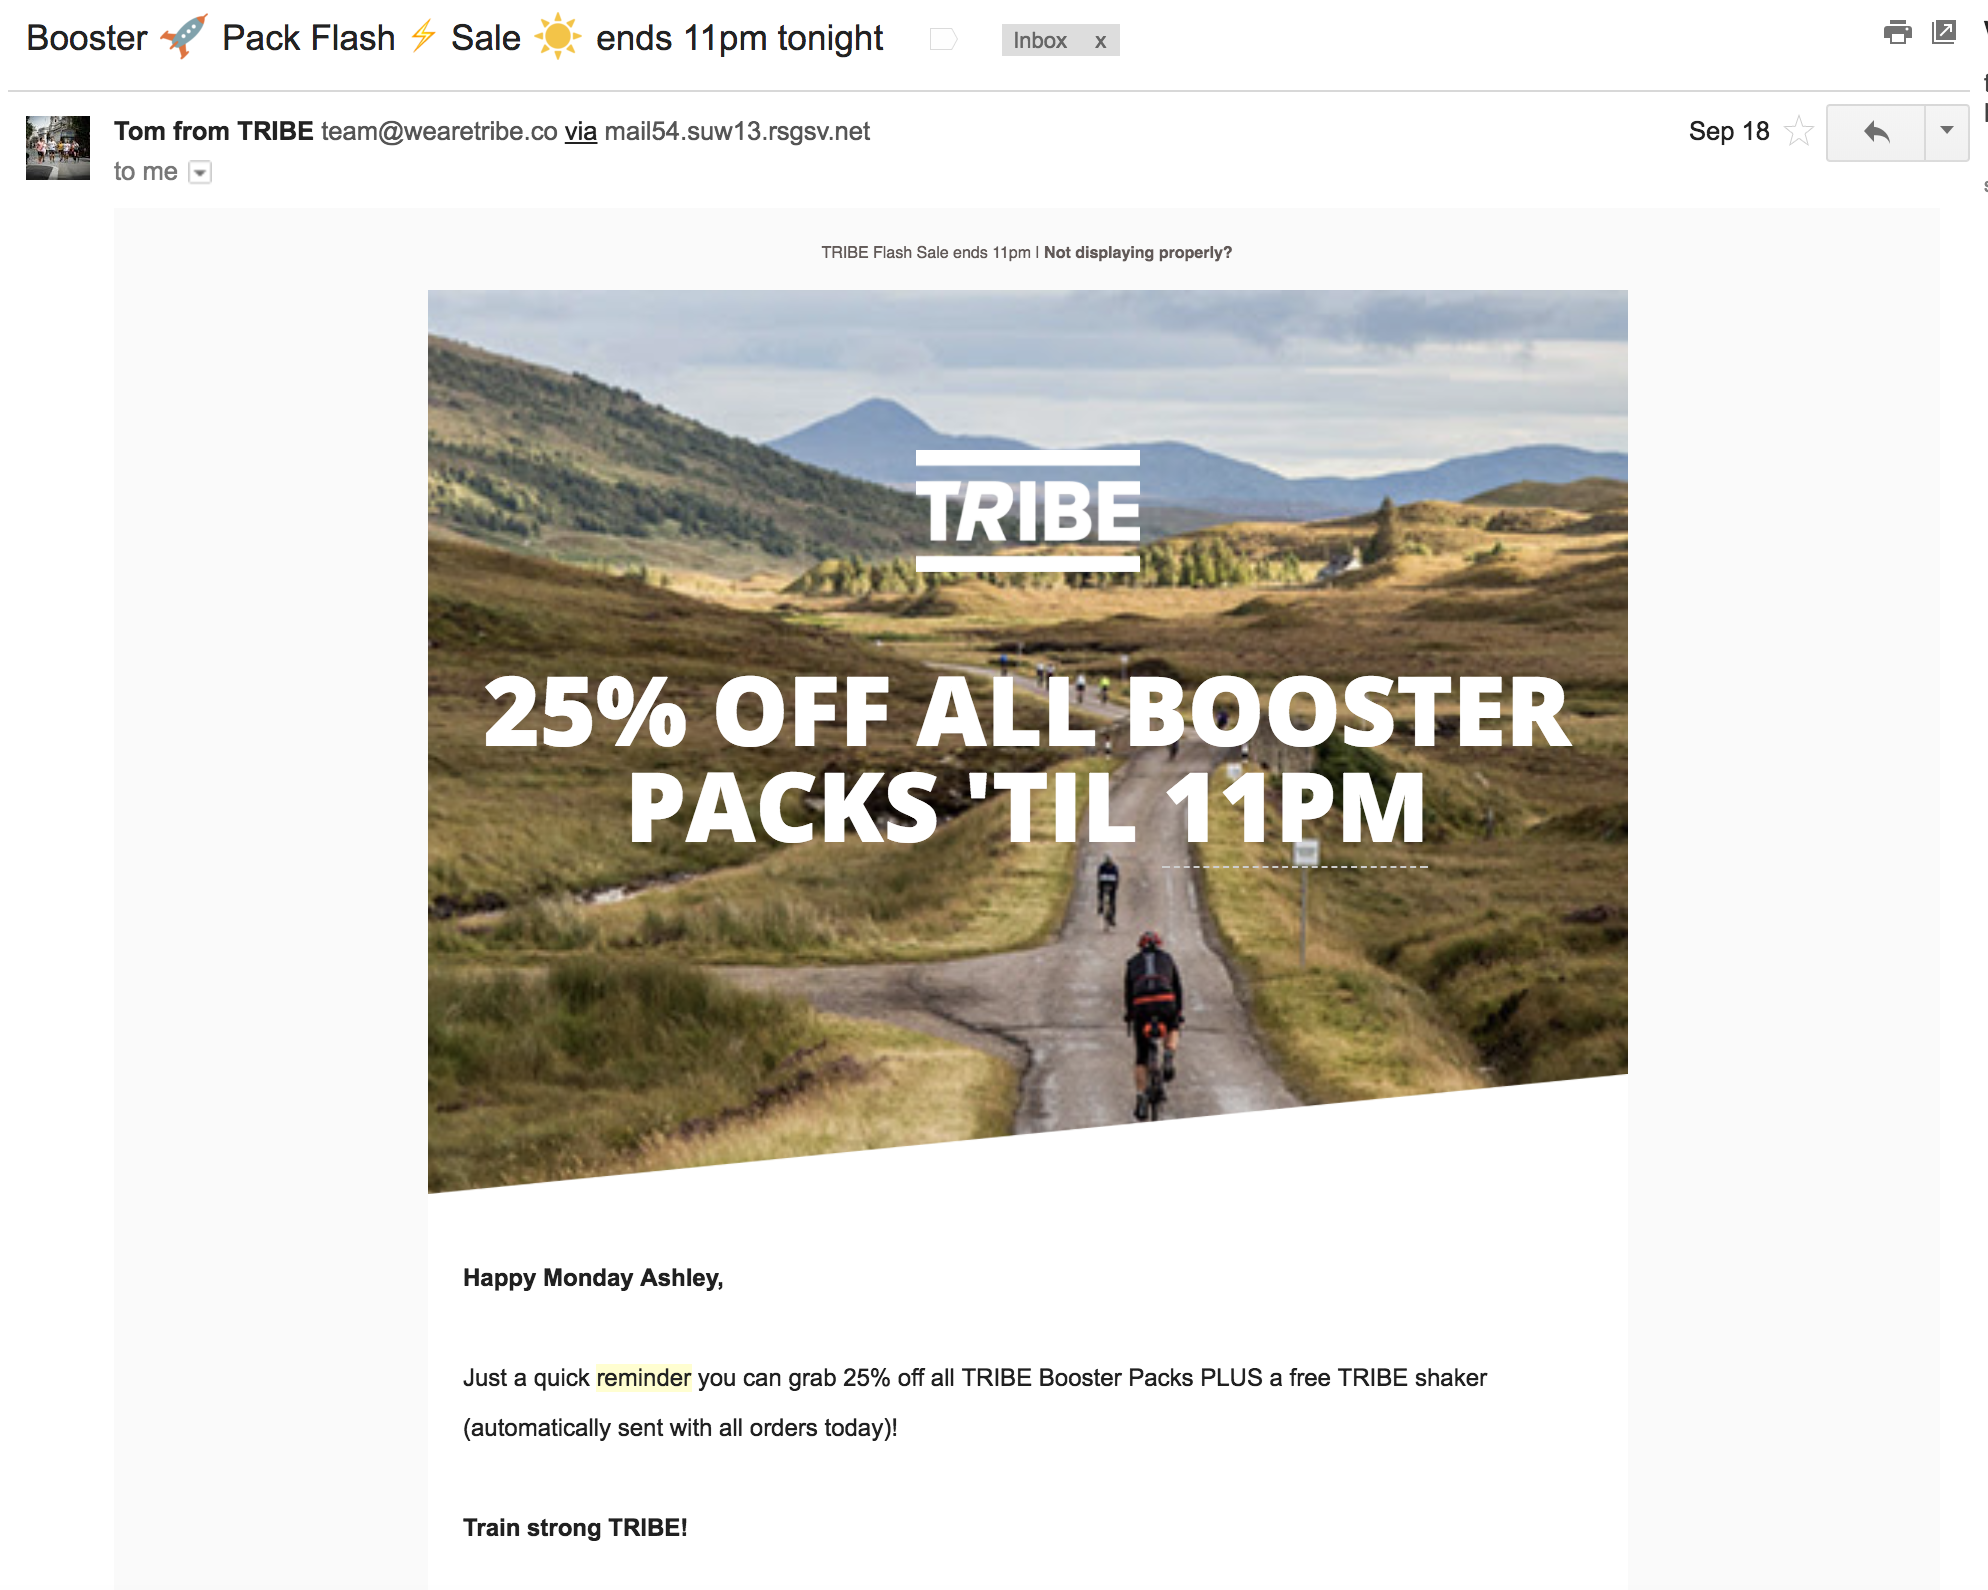 Screenshot showing an email by TRIBE